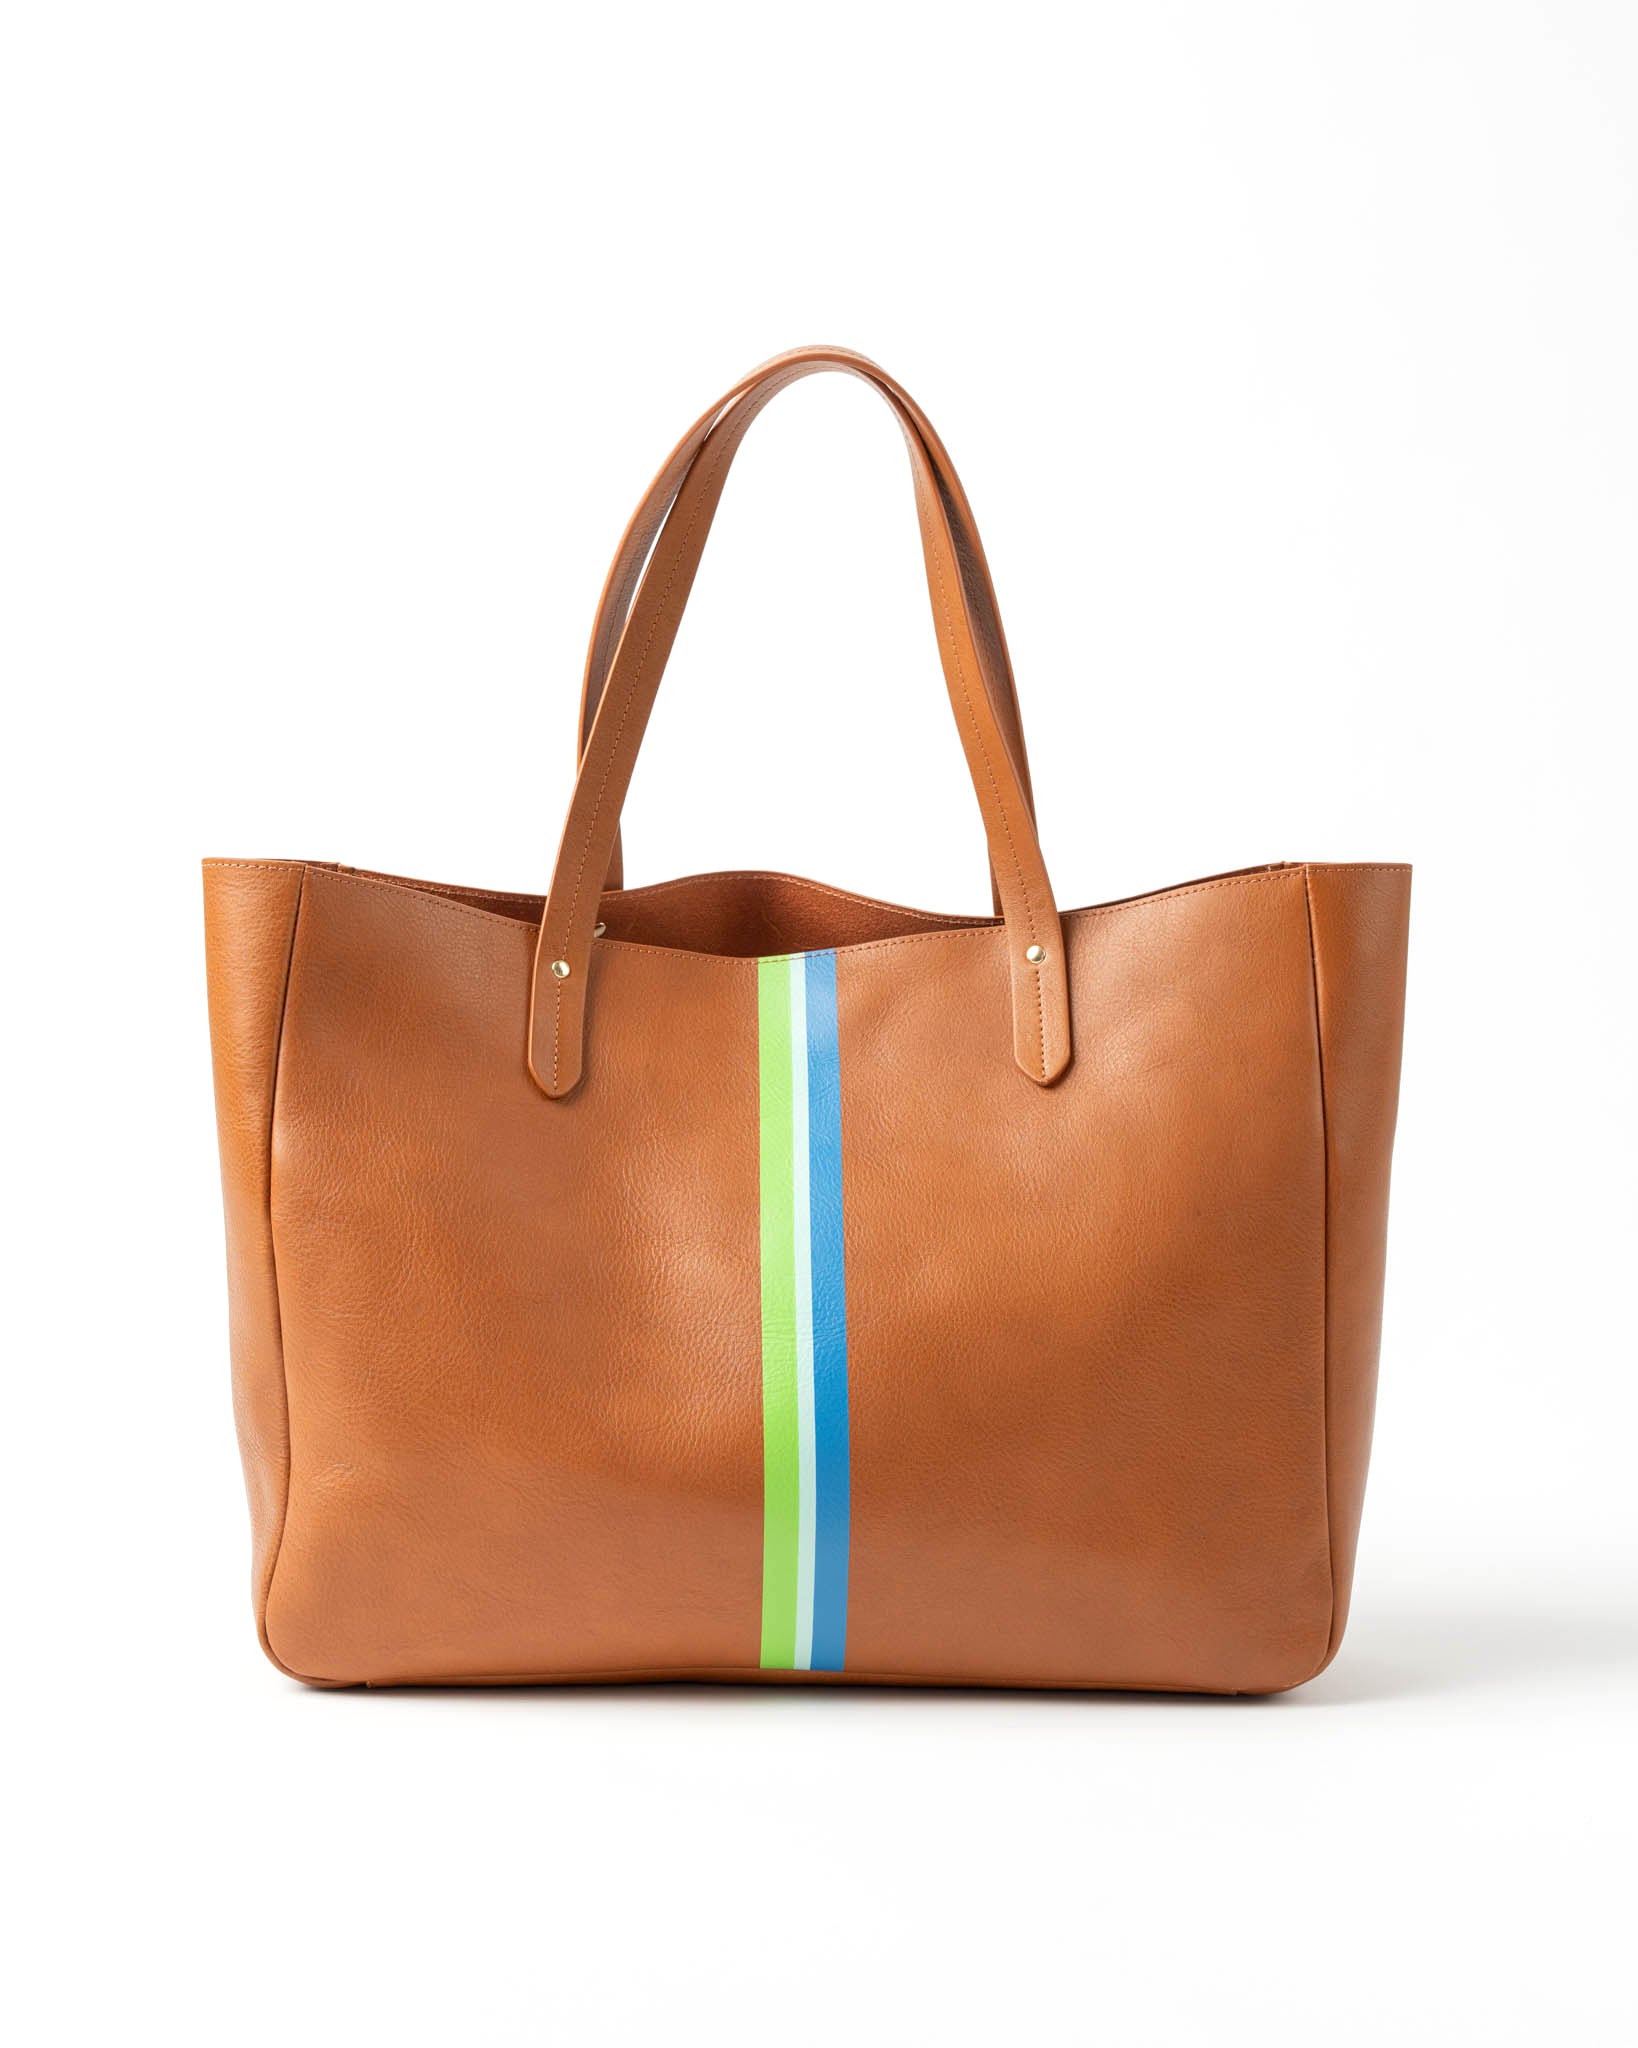 East West Tote - Ivy Cove Montecito